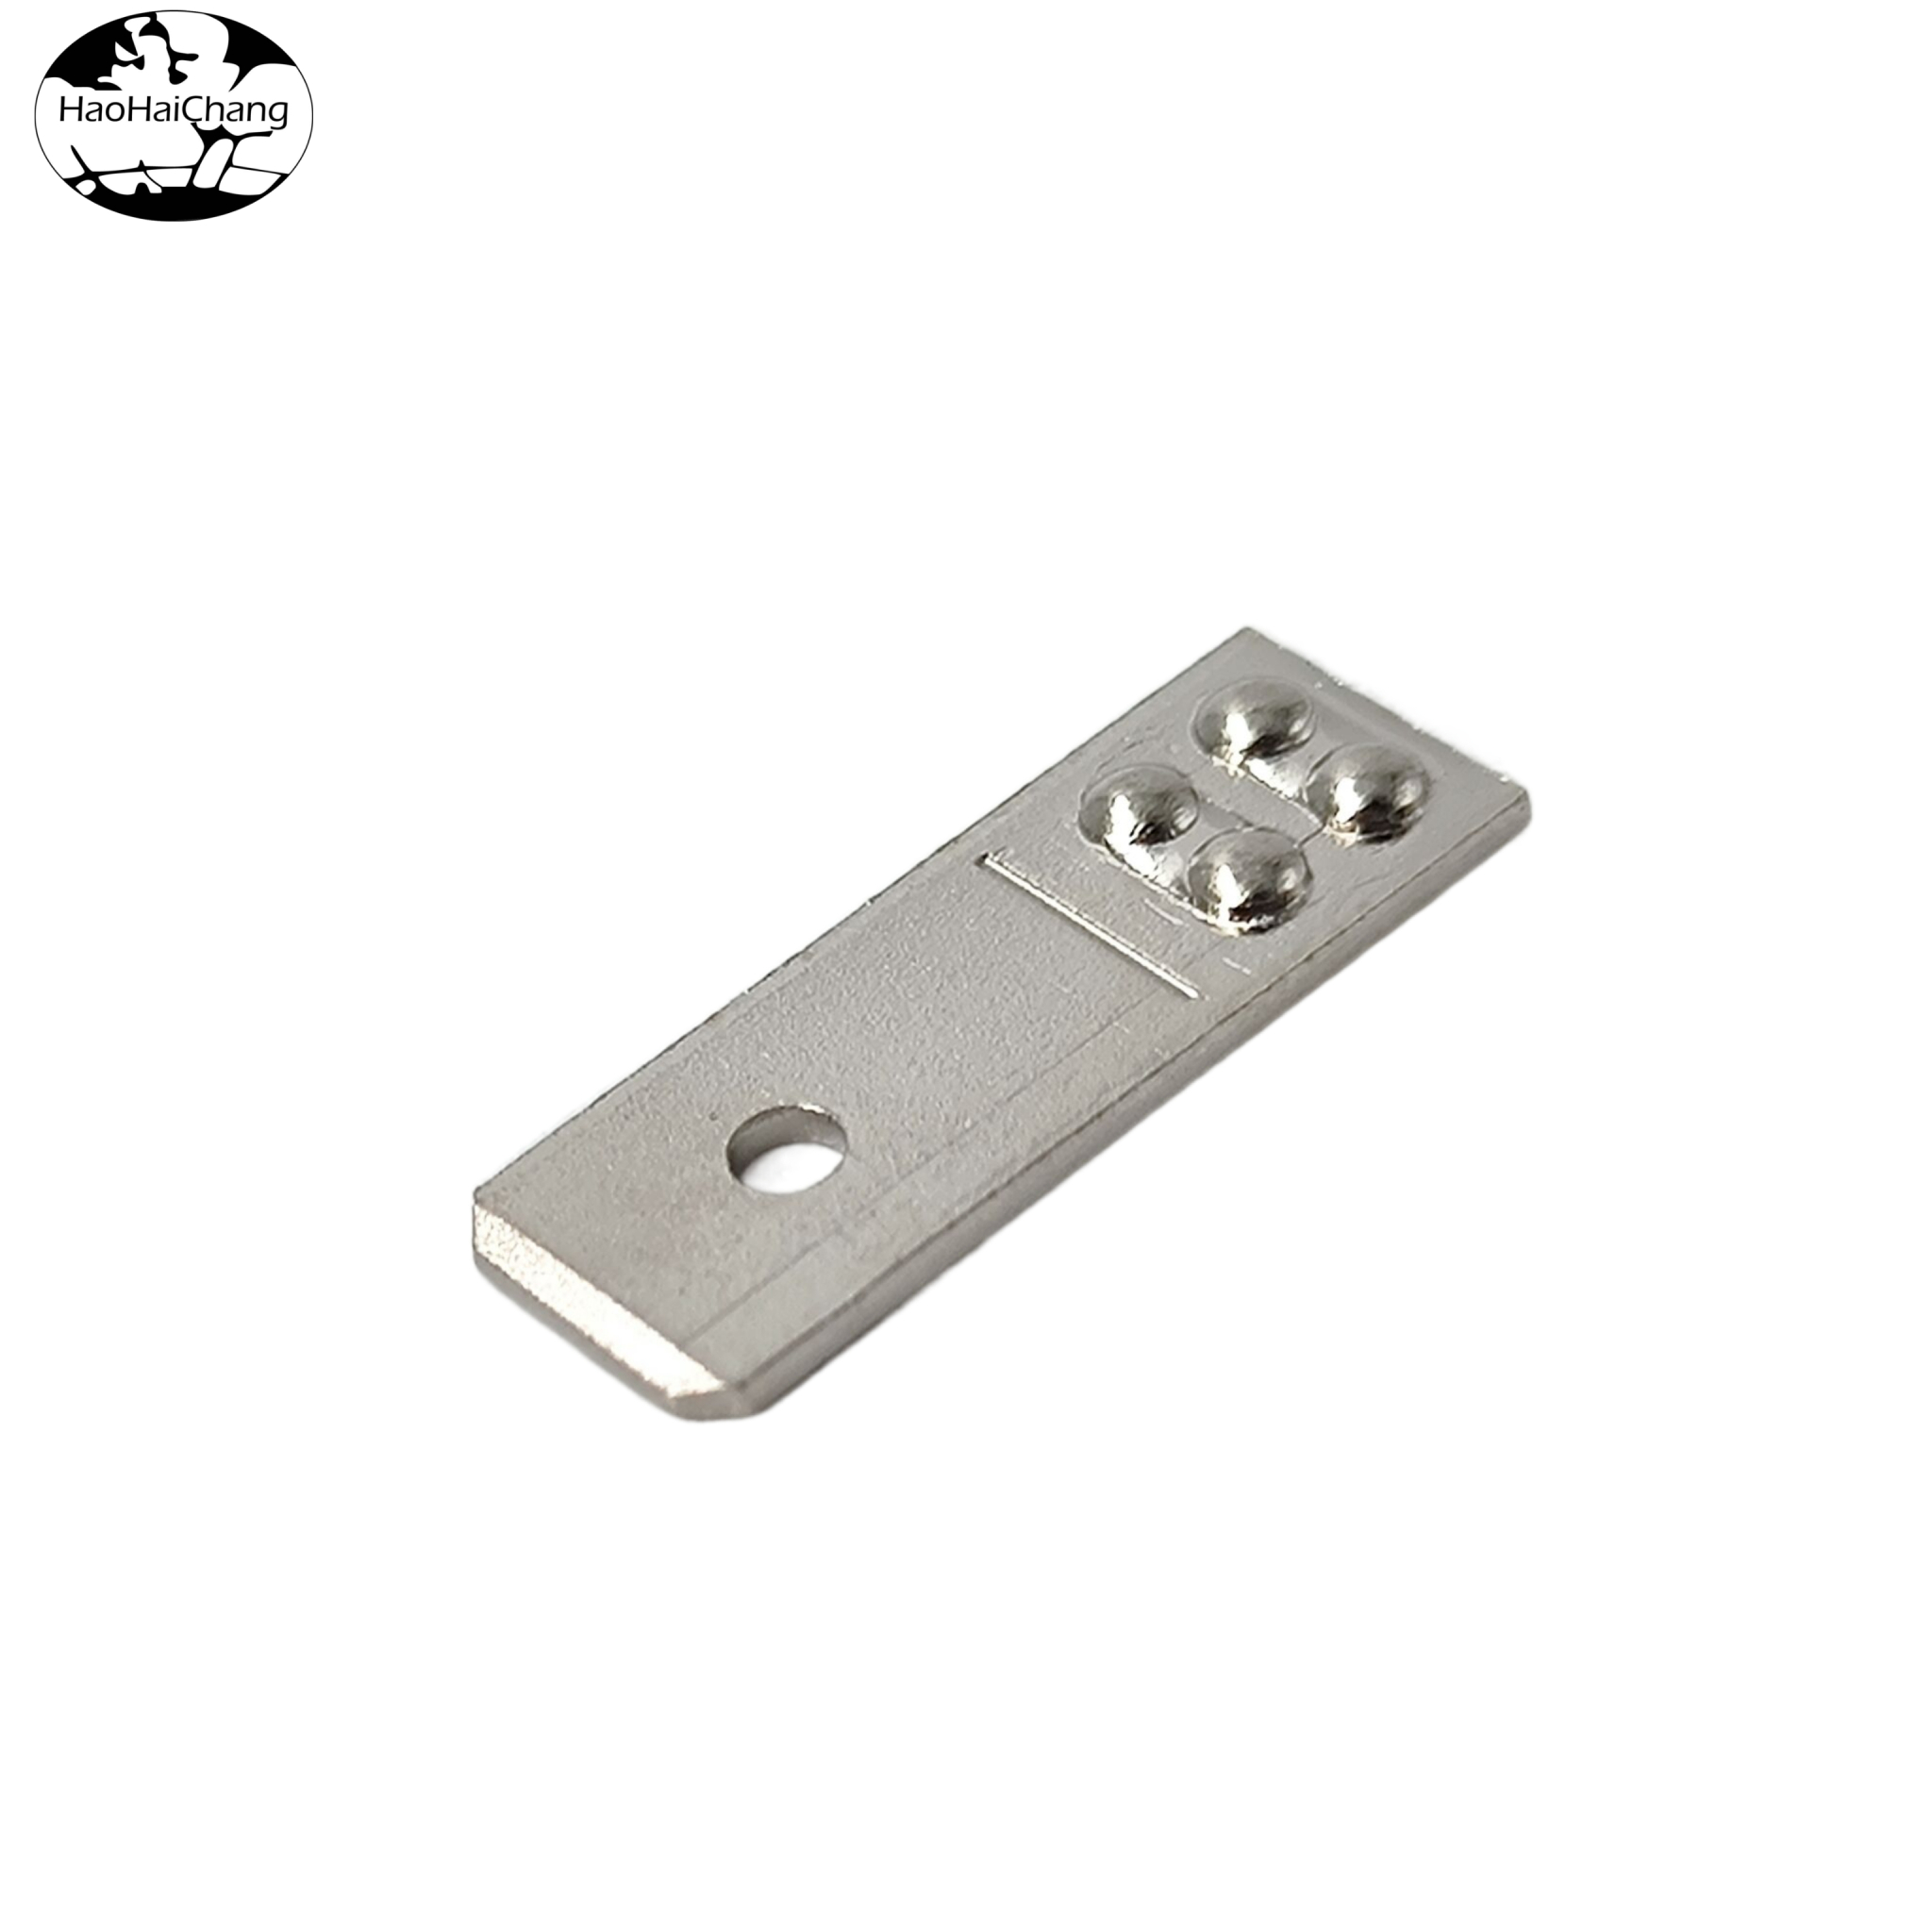 HHC-0219 Connector